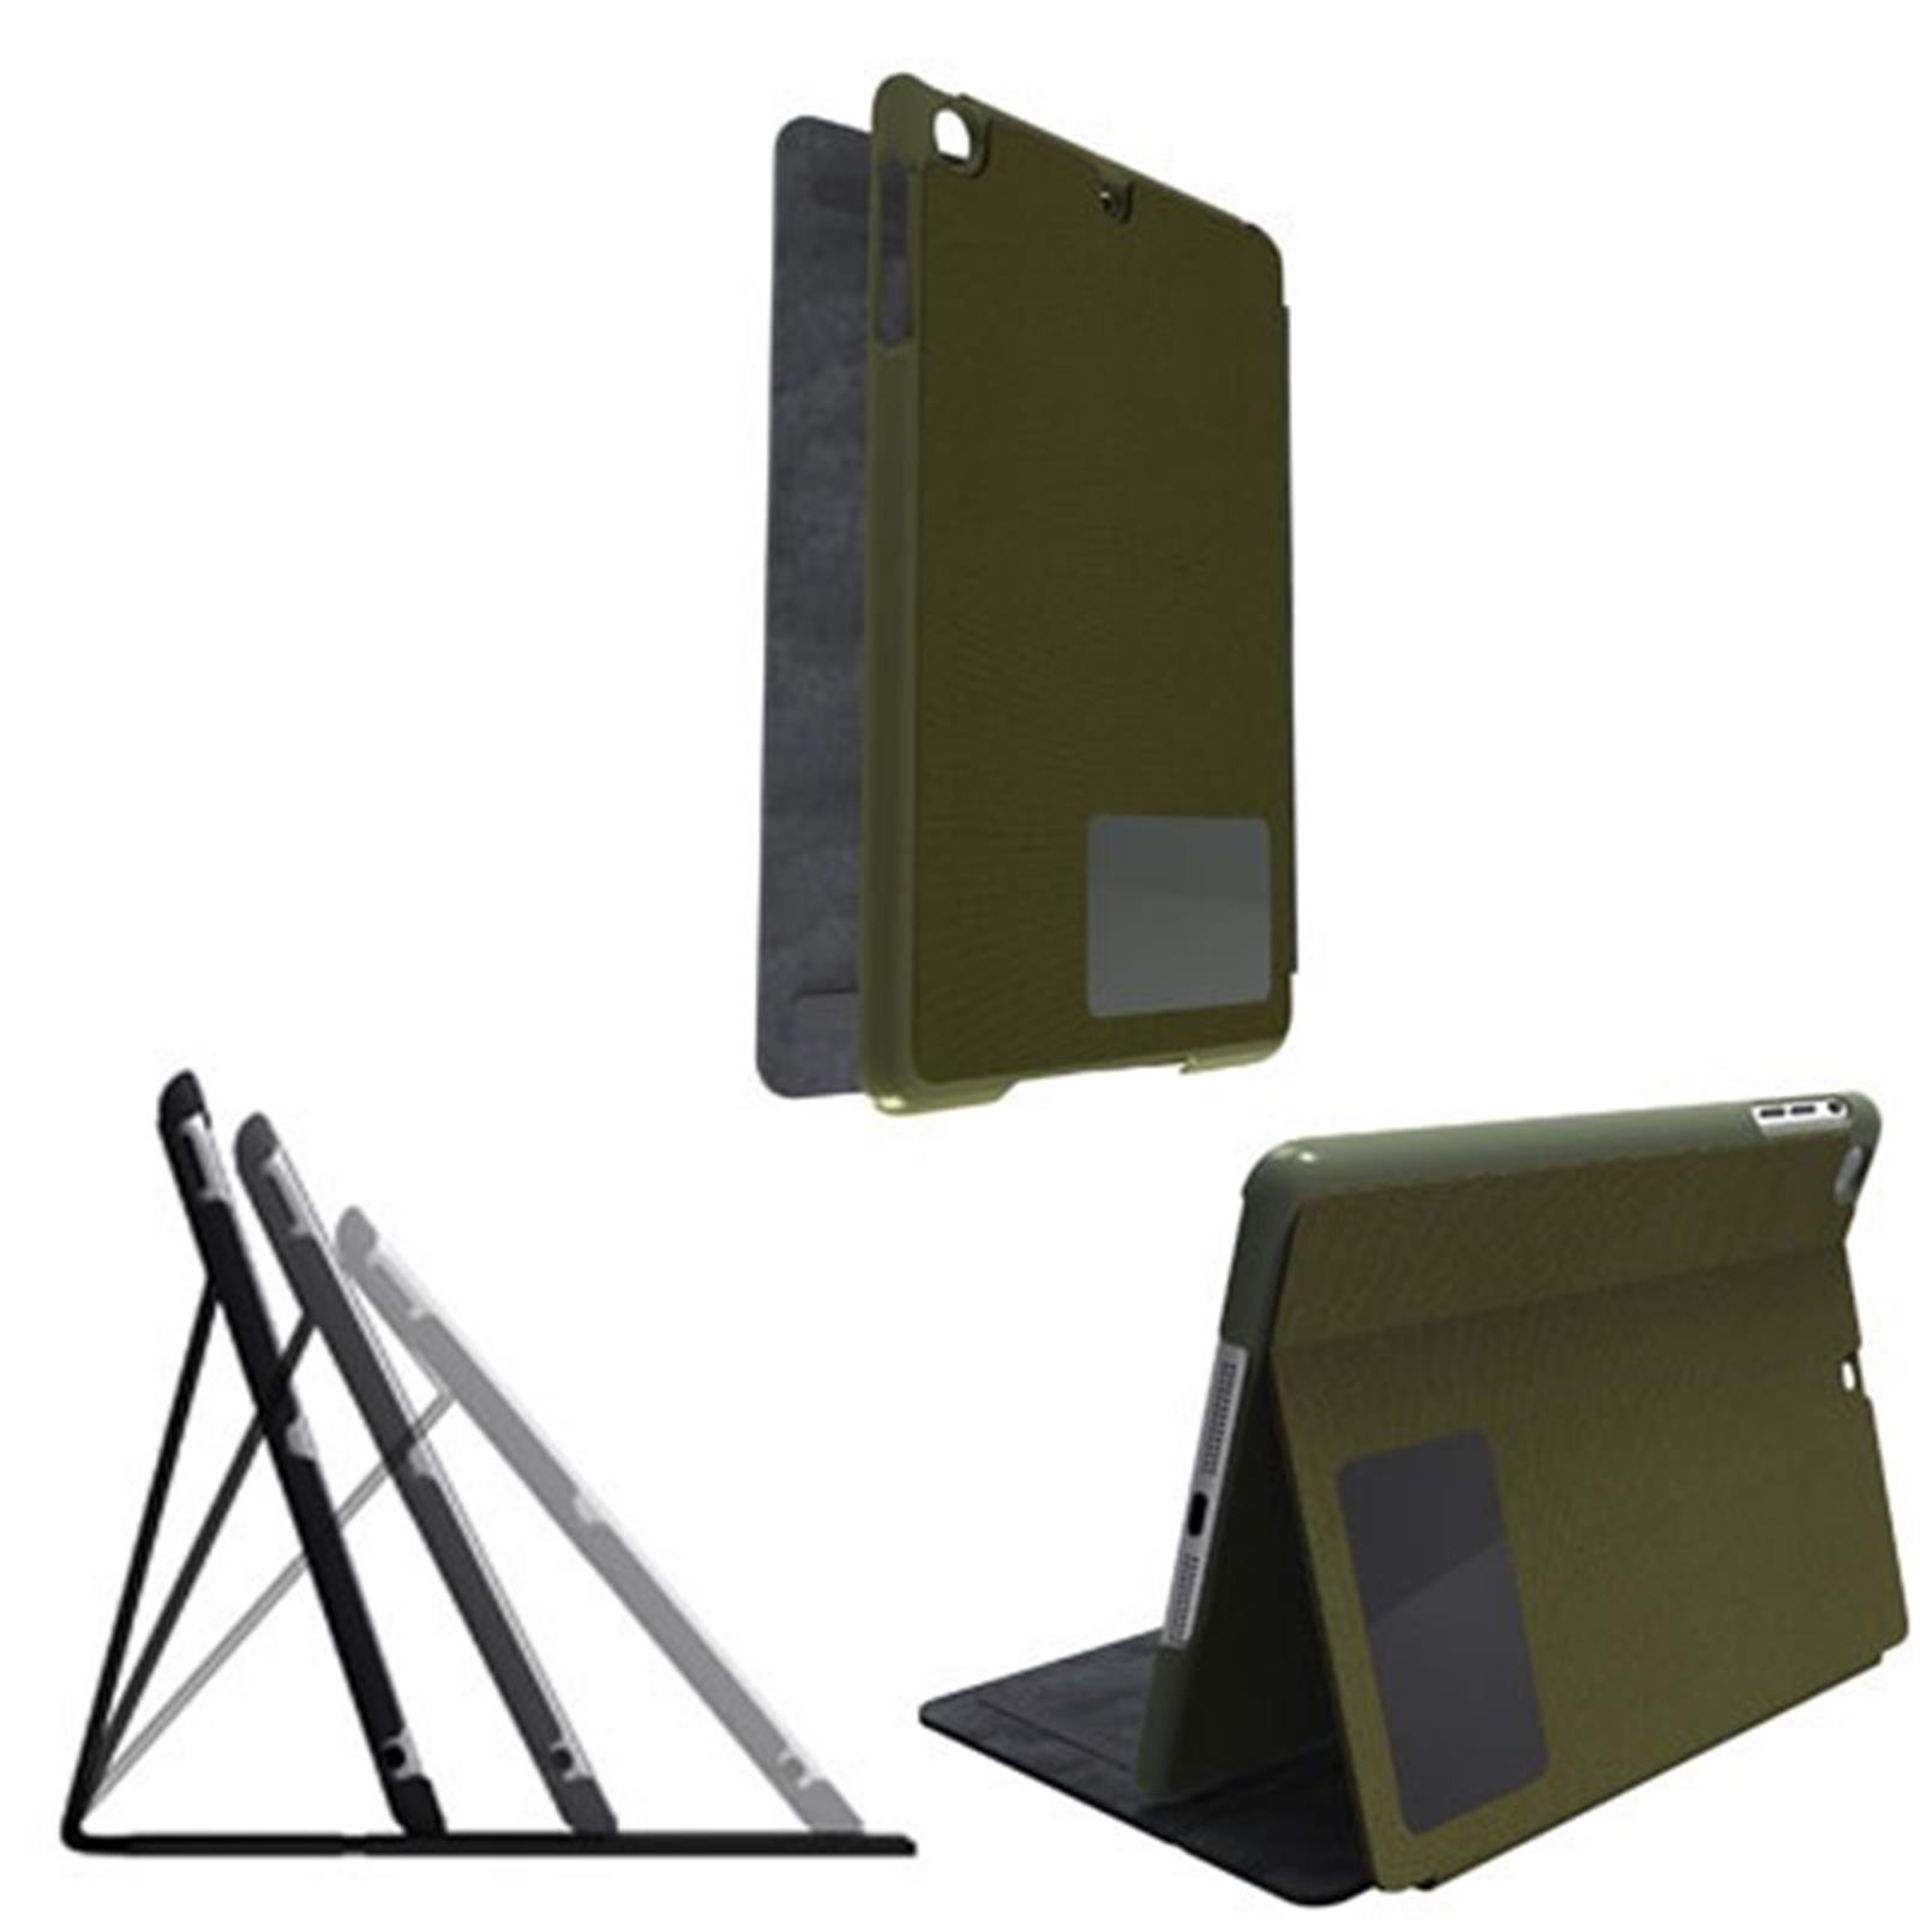 V *TRADE QTY* Brand New Kensington Hard Folio Case & Adjustable Stand Olive Green For iPad Air &